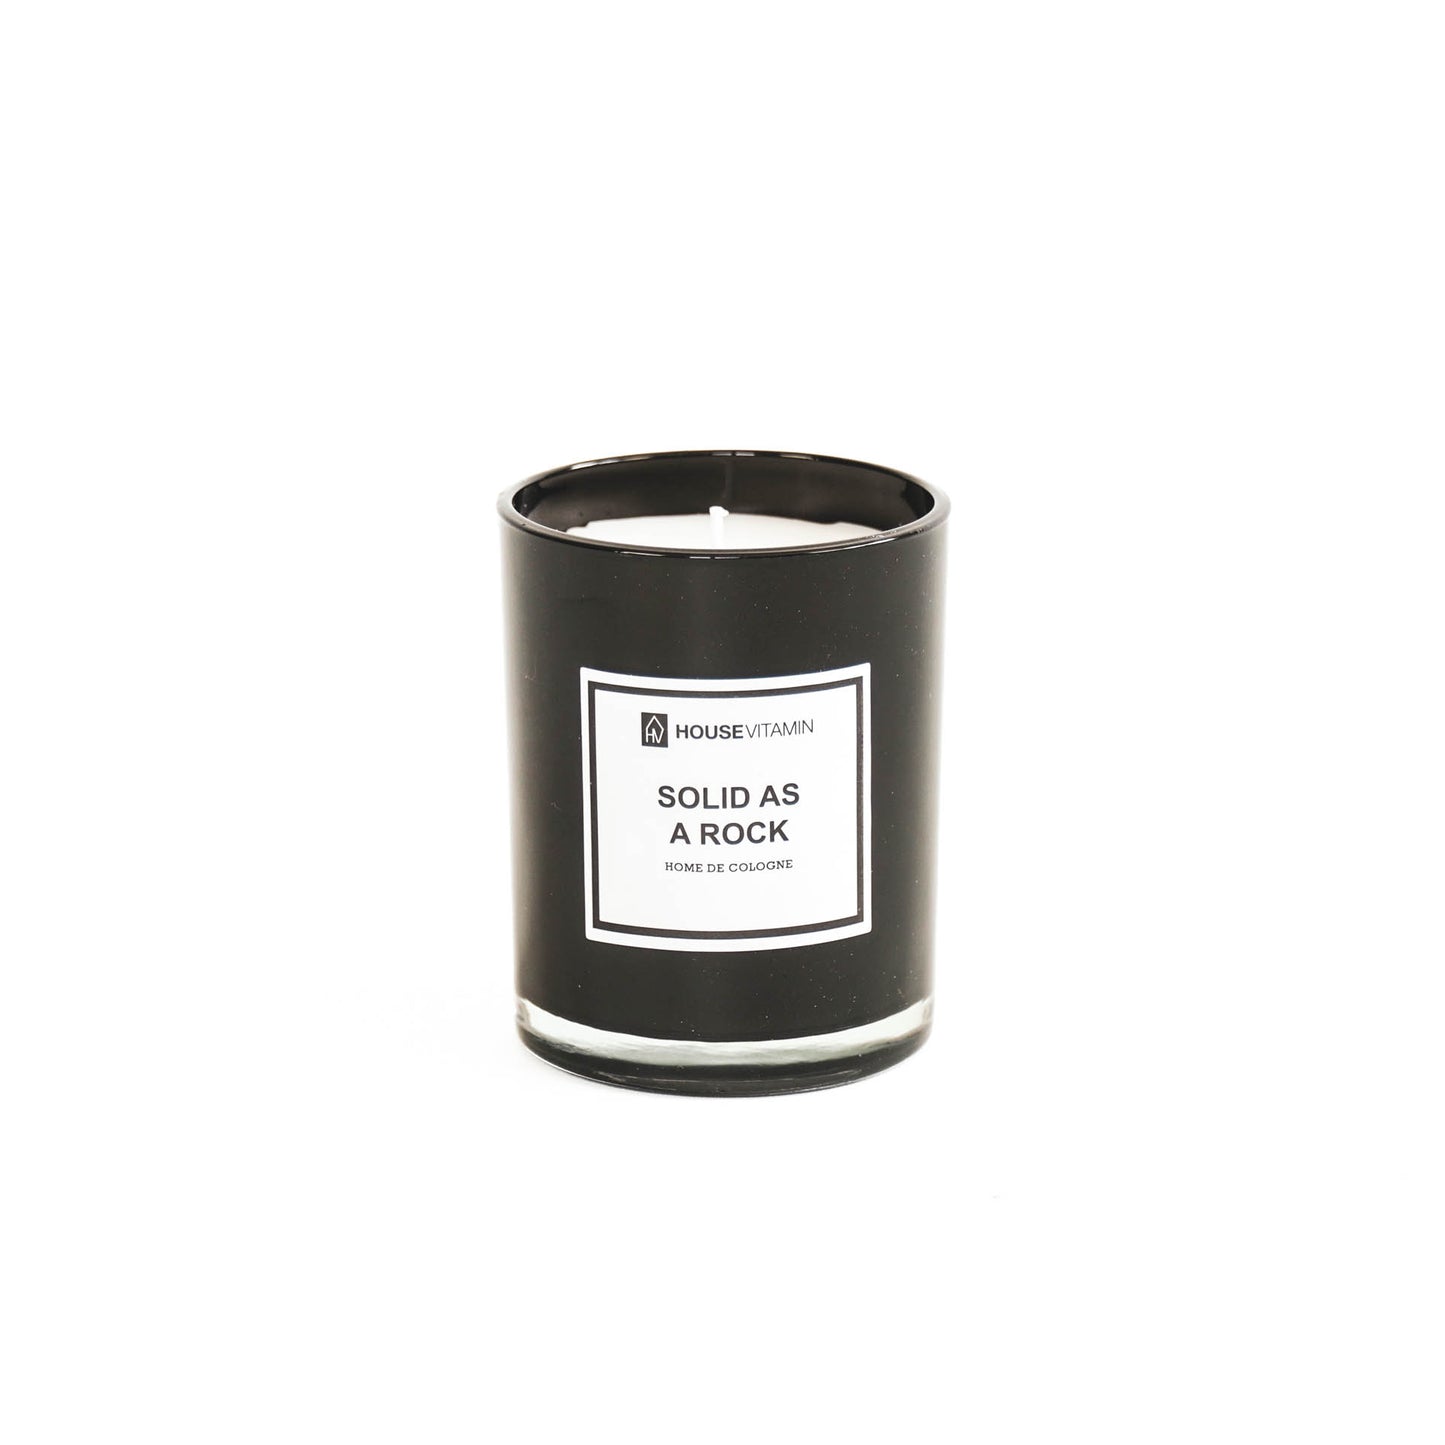 HV Home de Cologne Scented Candle - 250gr - Solid as a rock